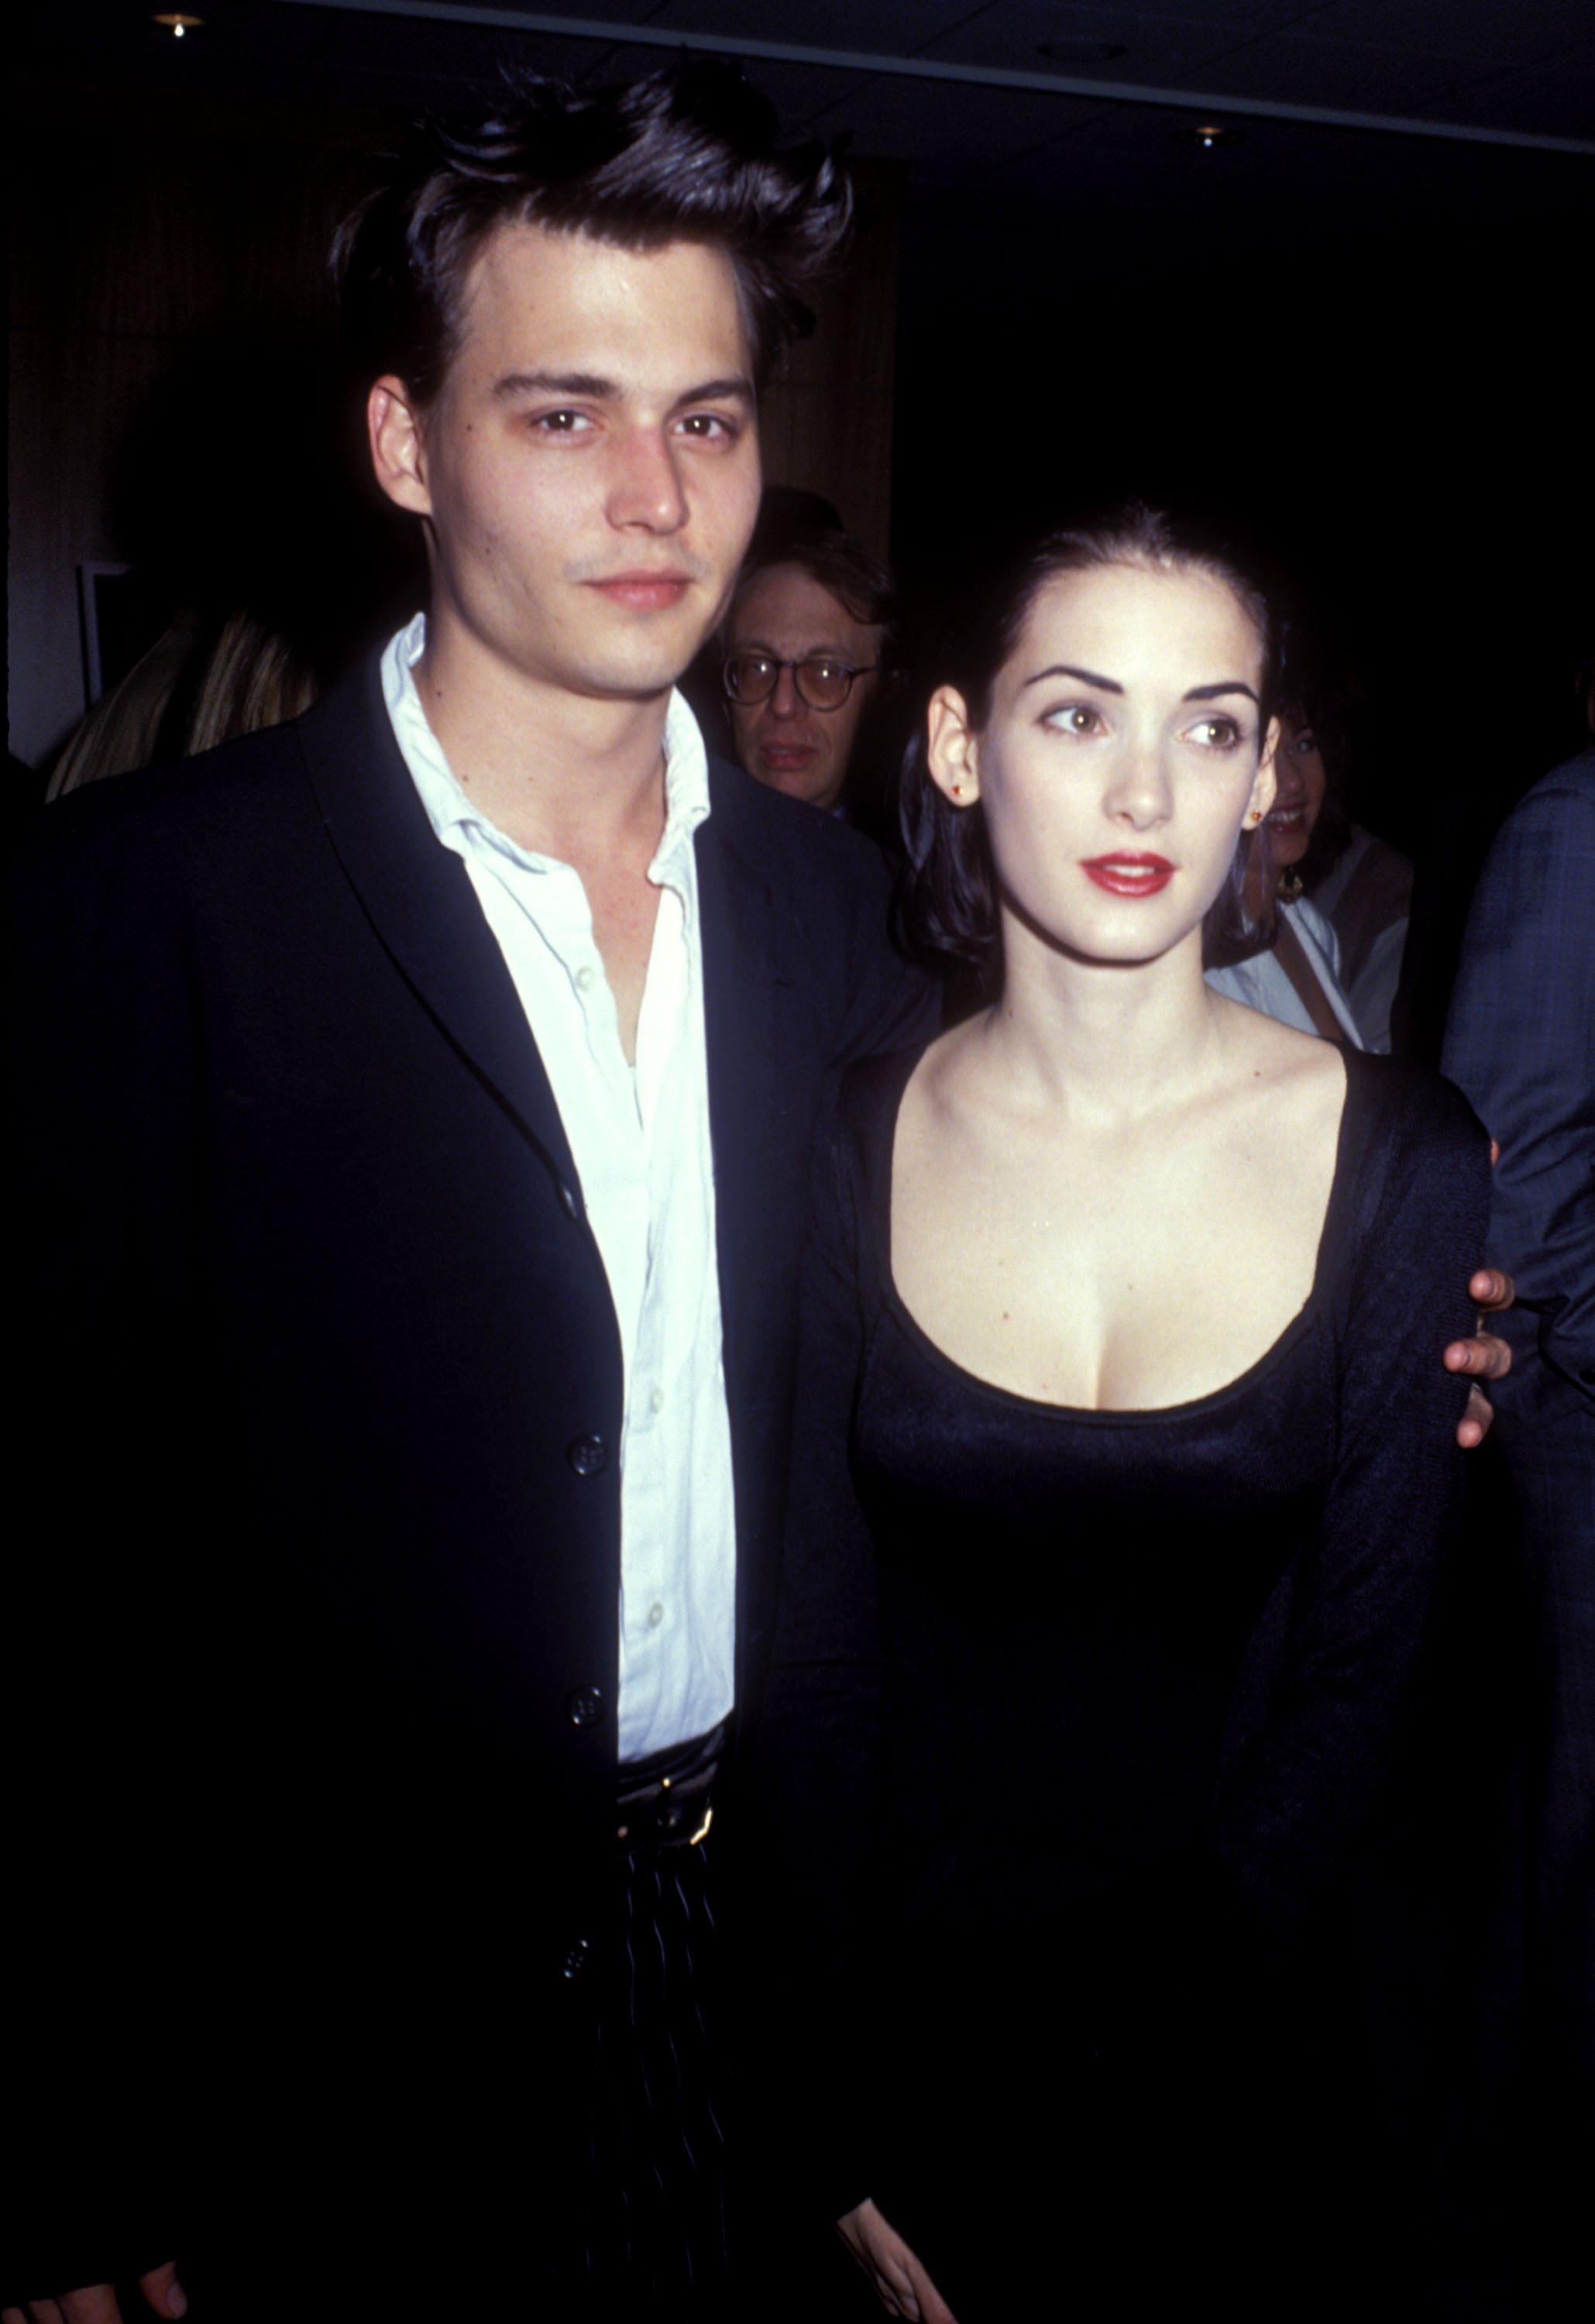 Why Did Johnny Depp and Winona Ryder Break up?